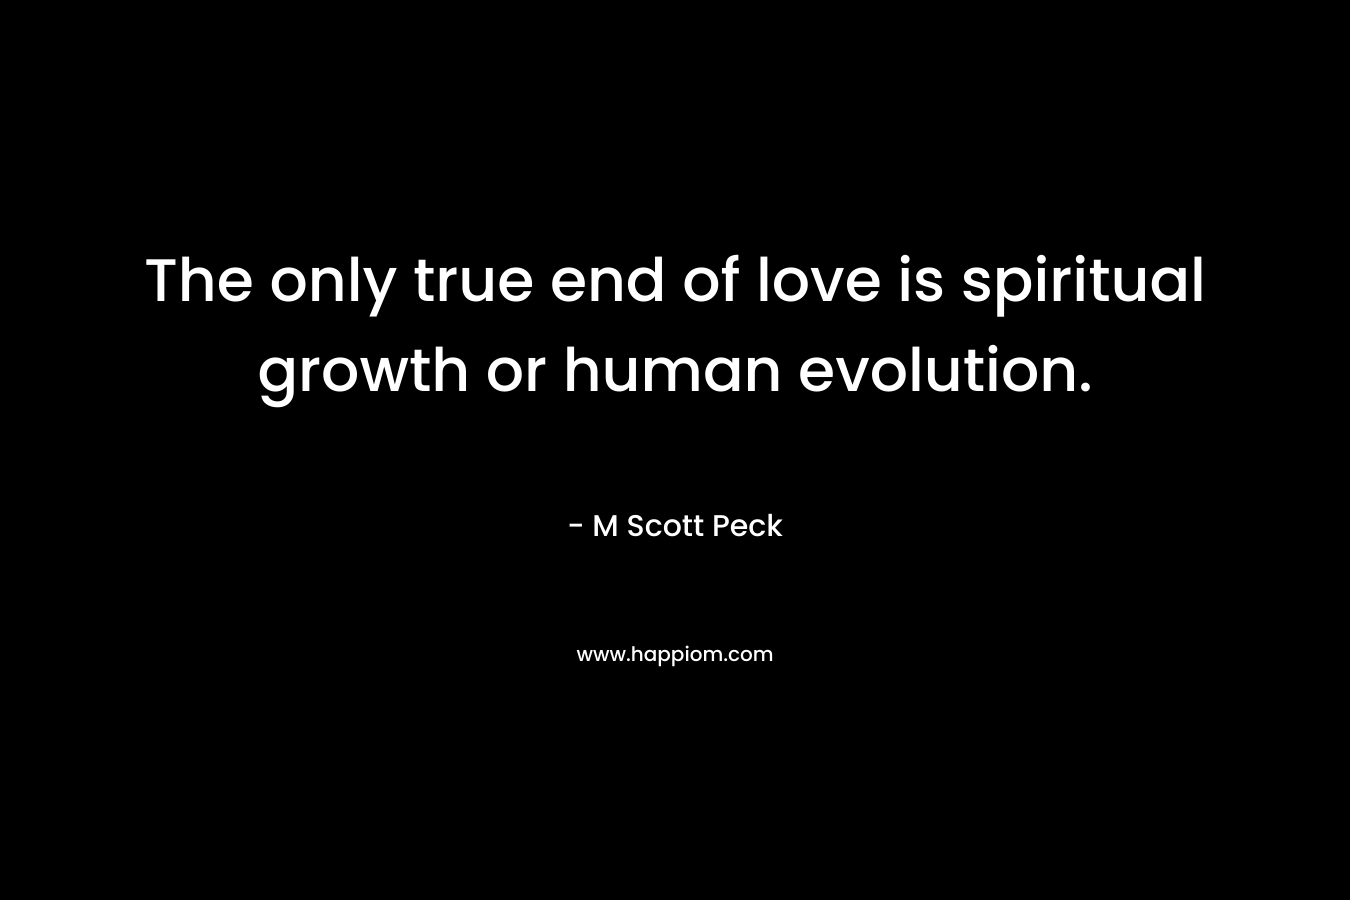 The only true end of love is spiritual growth or human evolution.